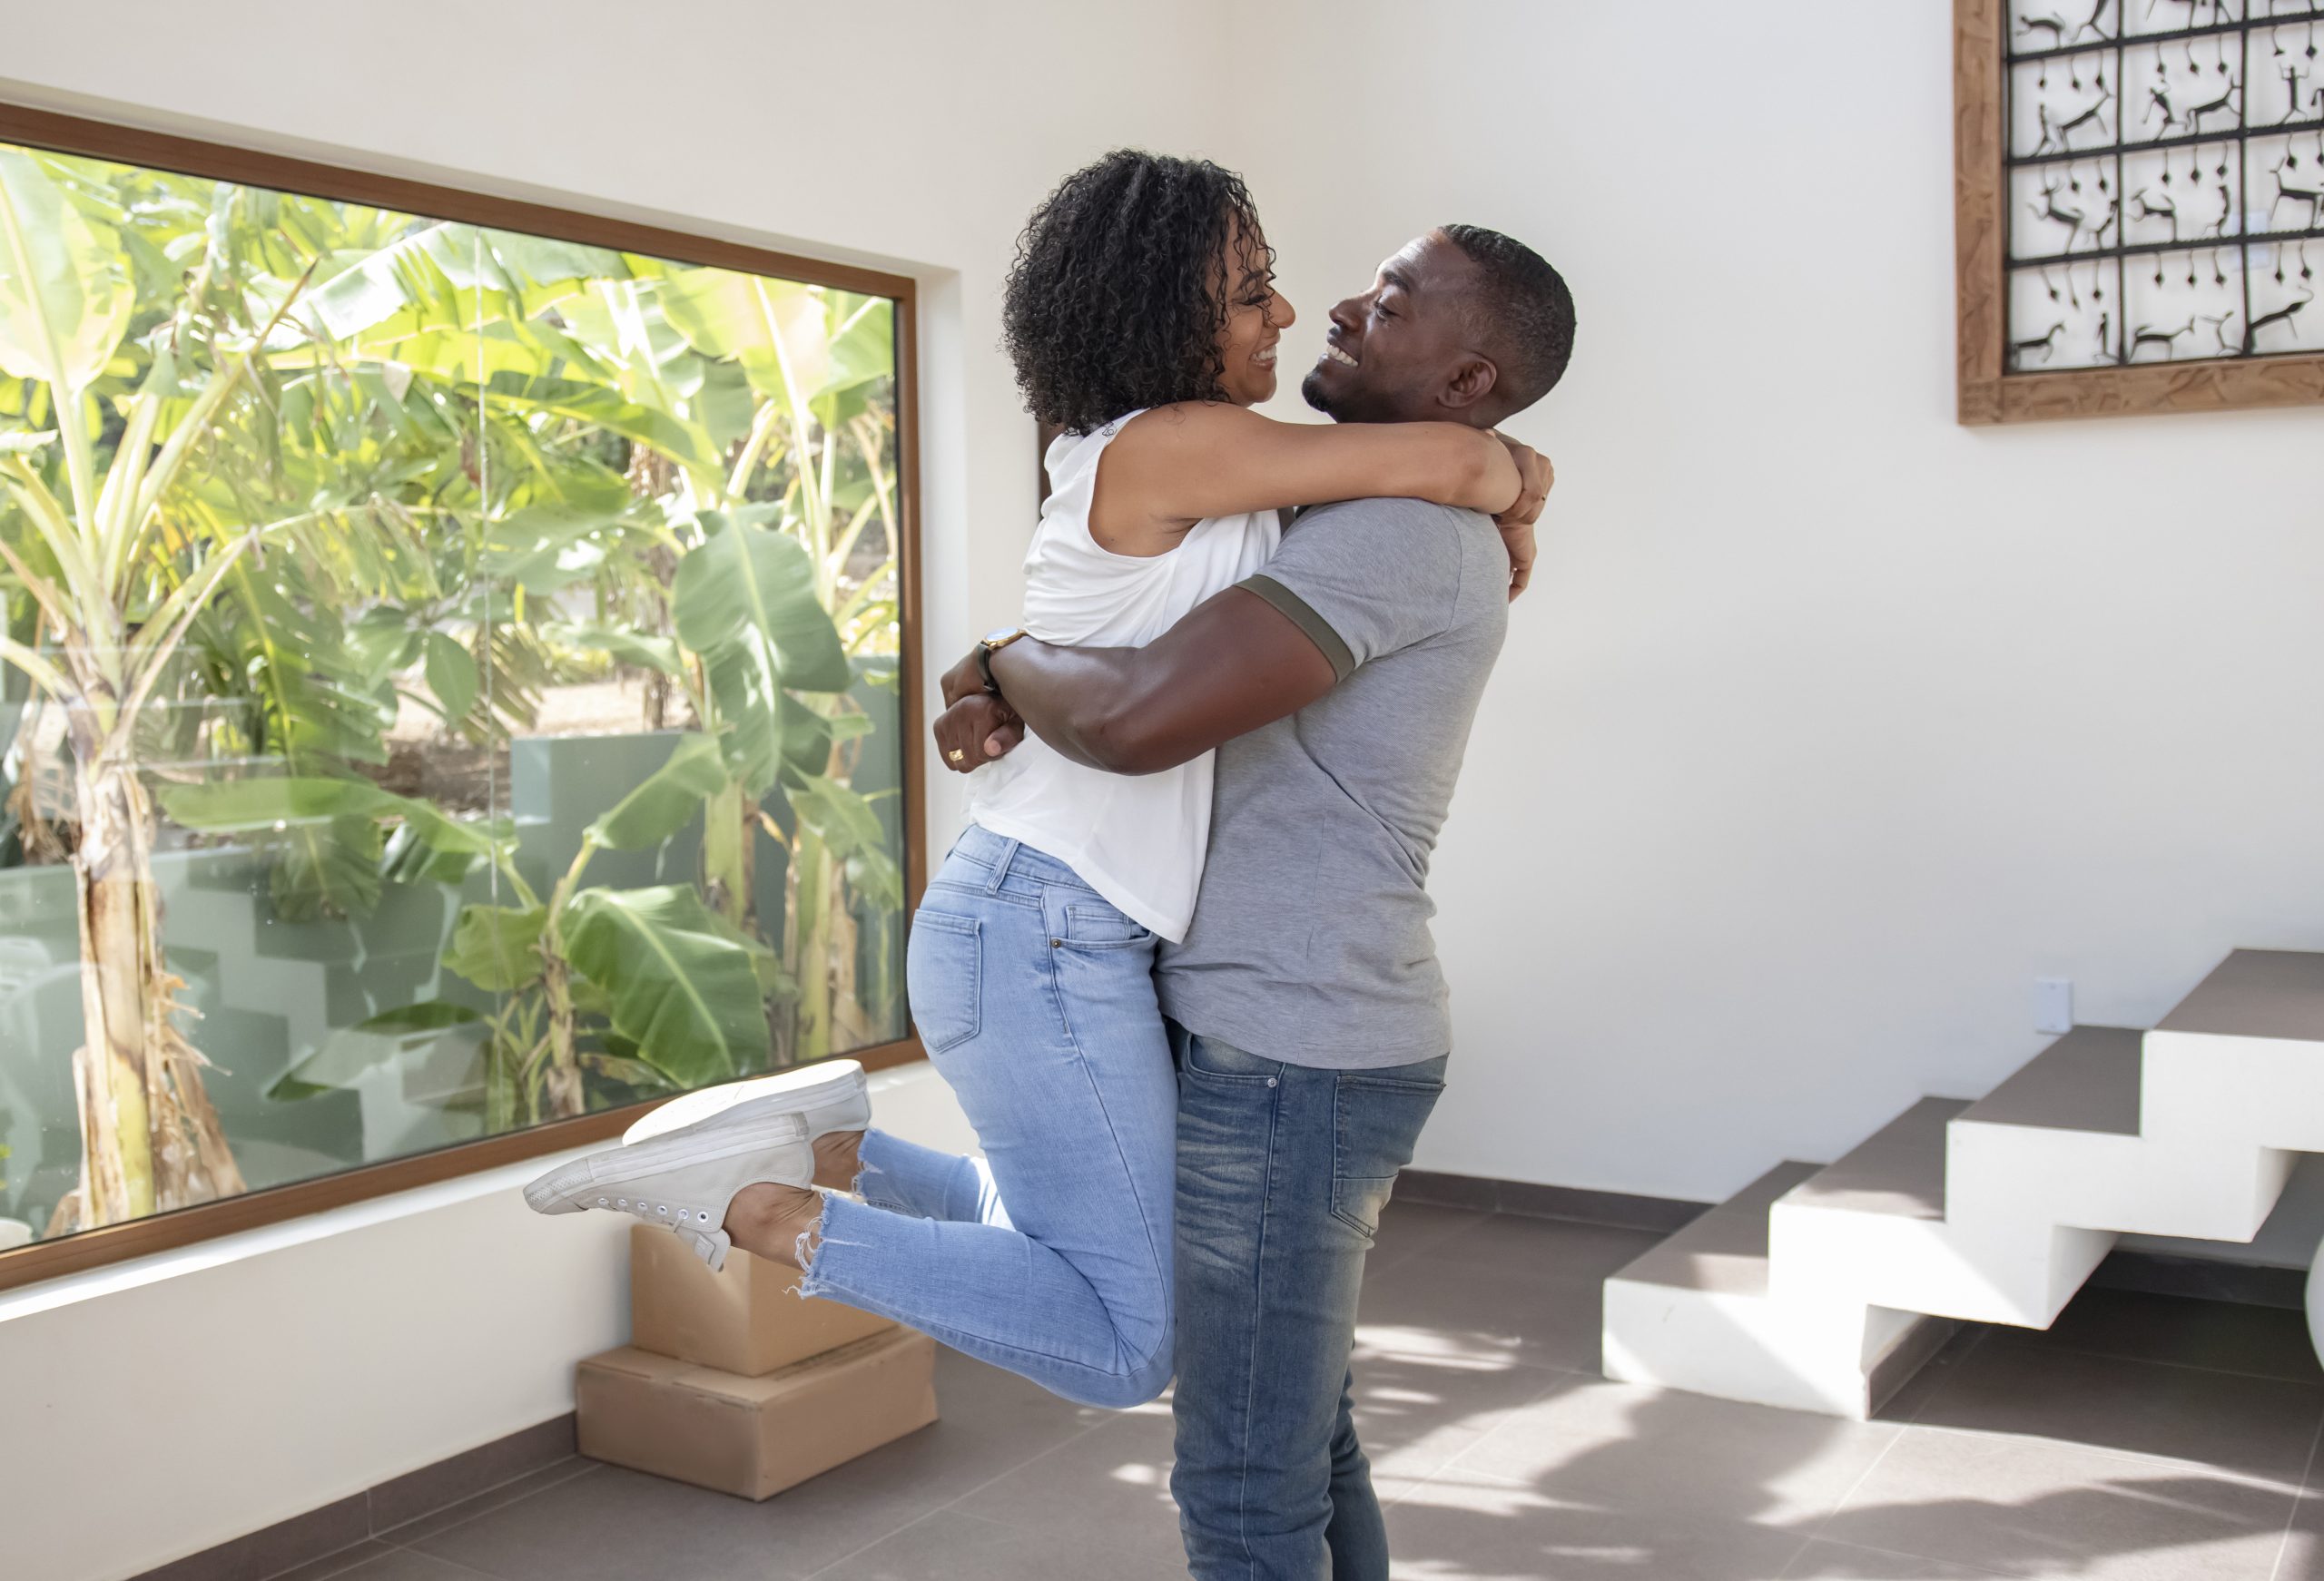 Man and woman are inside a house. The man holds the woman in his arms and they're smiling at each other